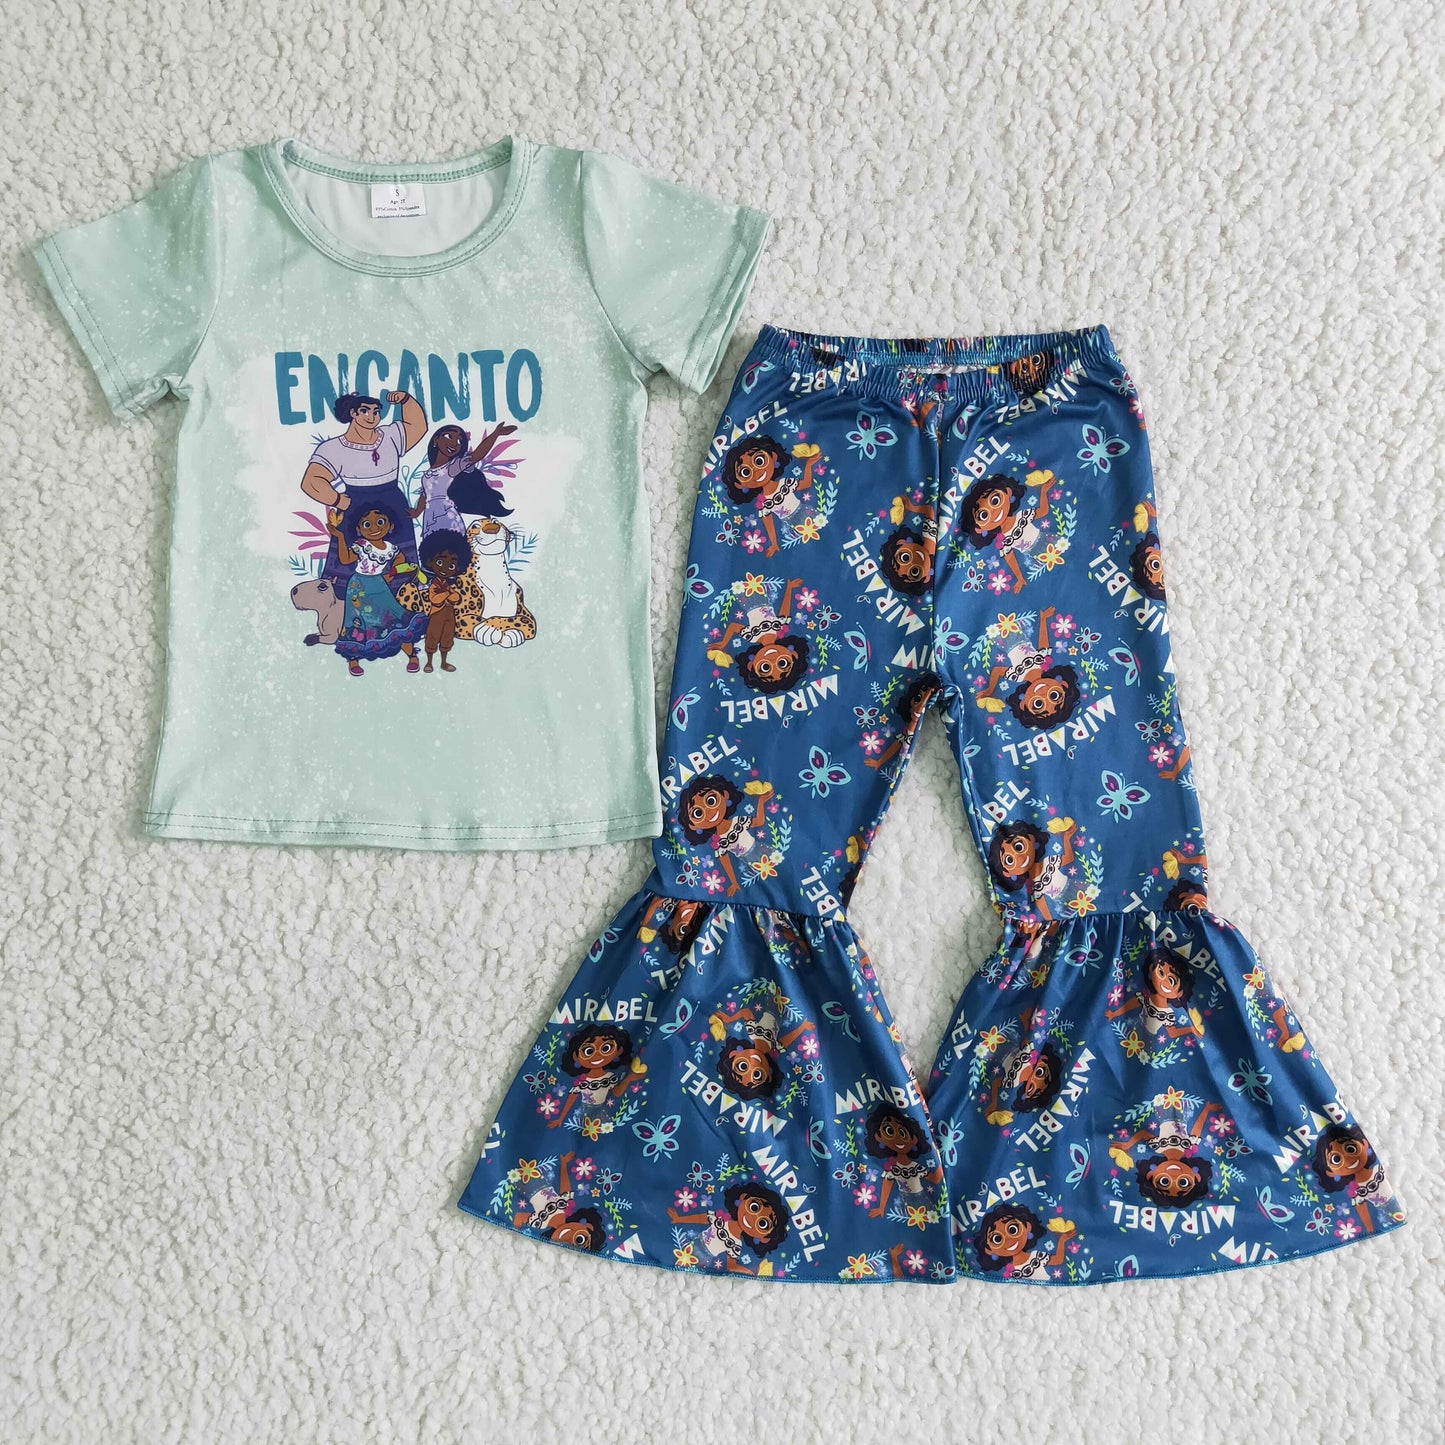 Baby girls Enco design cartoon outfit kids summer clothing